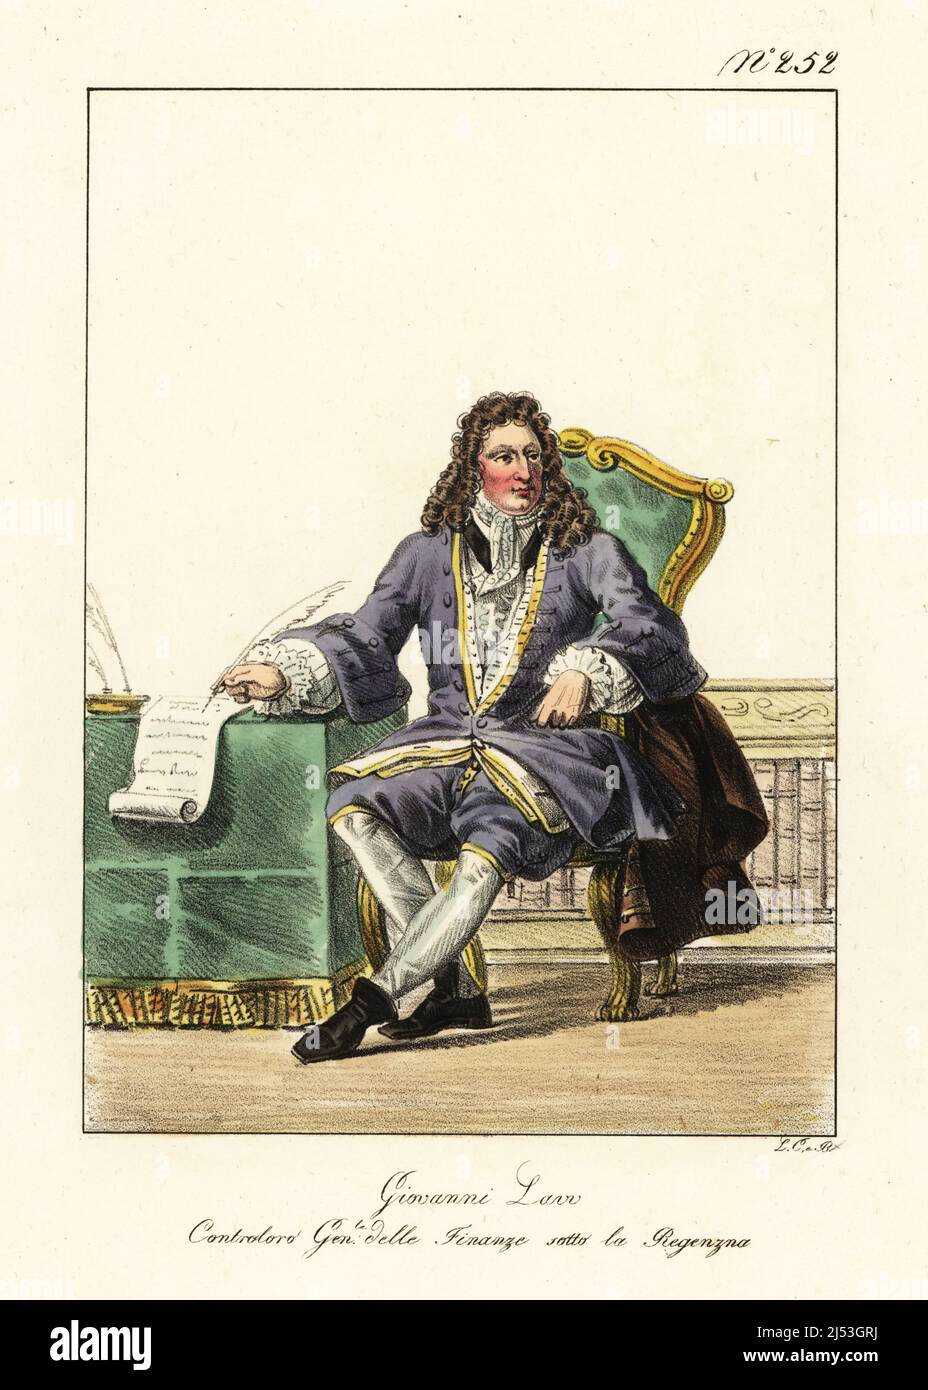 John Law, 1671-1729, Scottish economist and banker who served as Controller General of Finances under the French Regency, 1715-1723. In purple coat and breeches, hose, bootlets, with quill pen and scroll. Jean Law. Controleur General des Finances sous la Regence. Handcoloured lithograph by Lorenzo Bianchi and Domenico Cuciniello after Hippolyte Lecomte from Costumi civili e militari della monarchia francese dal 1200 al 1820, Naples, 1825. Italian edition of Lecomte’s Civilian and military costumes of the French monarchy from 1200 to 1820. Stock Photo